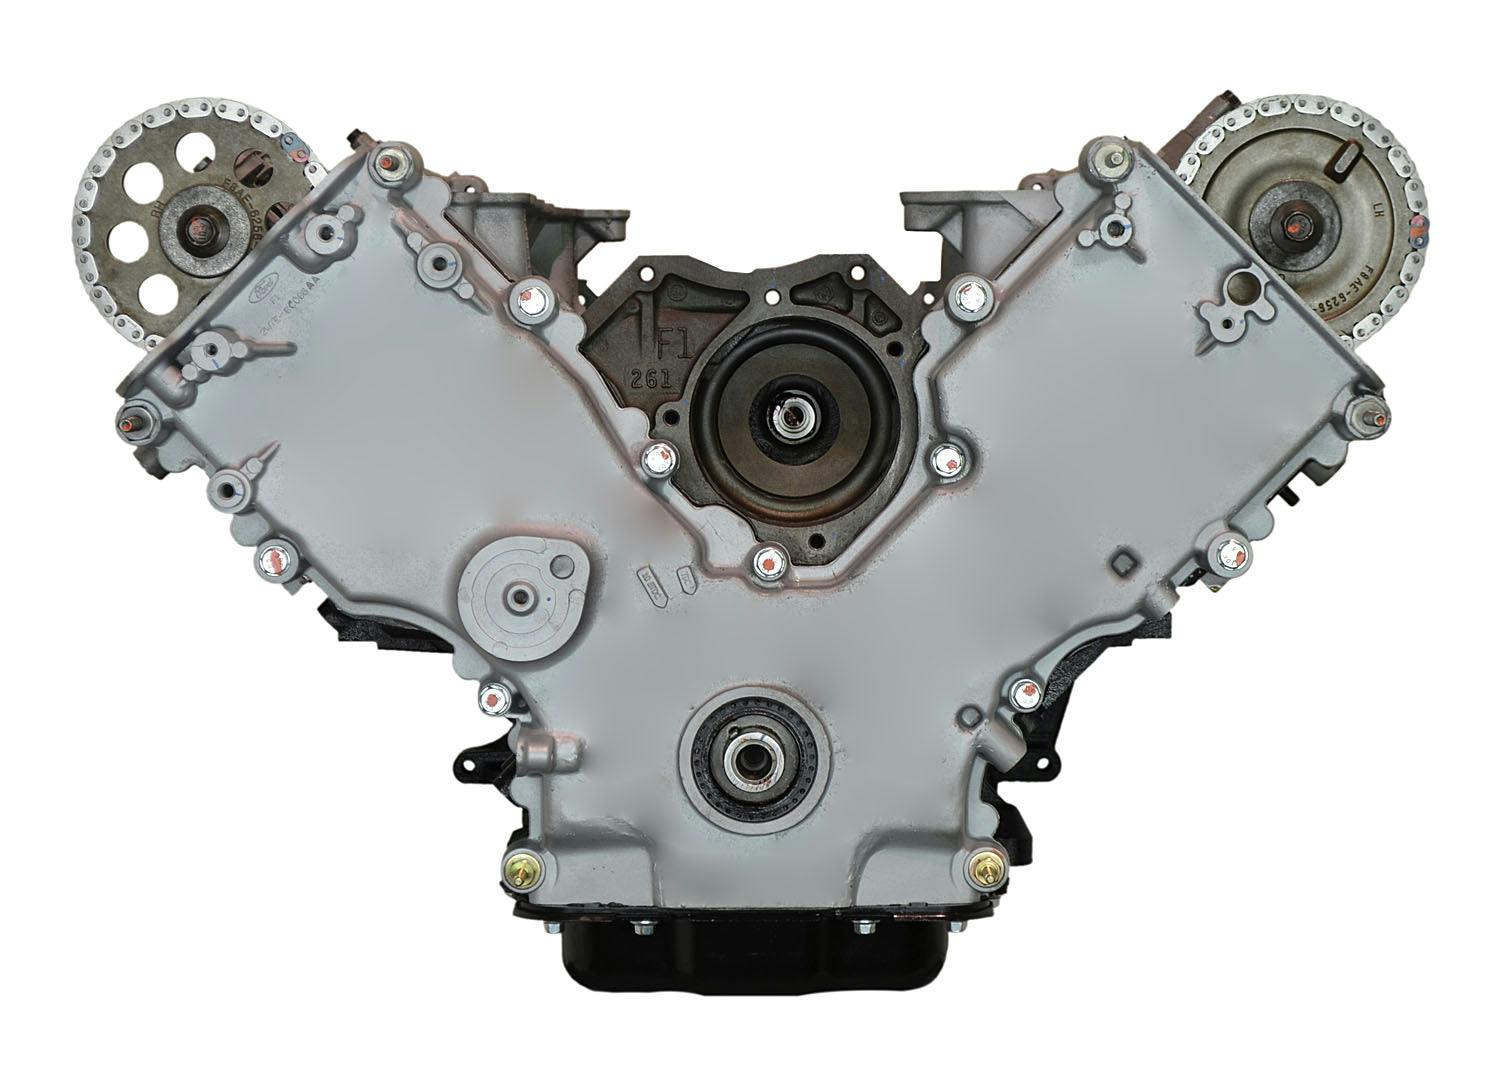 4.6L V8 Engine for 2002-2004 Ford Mustang